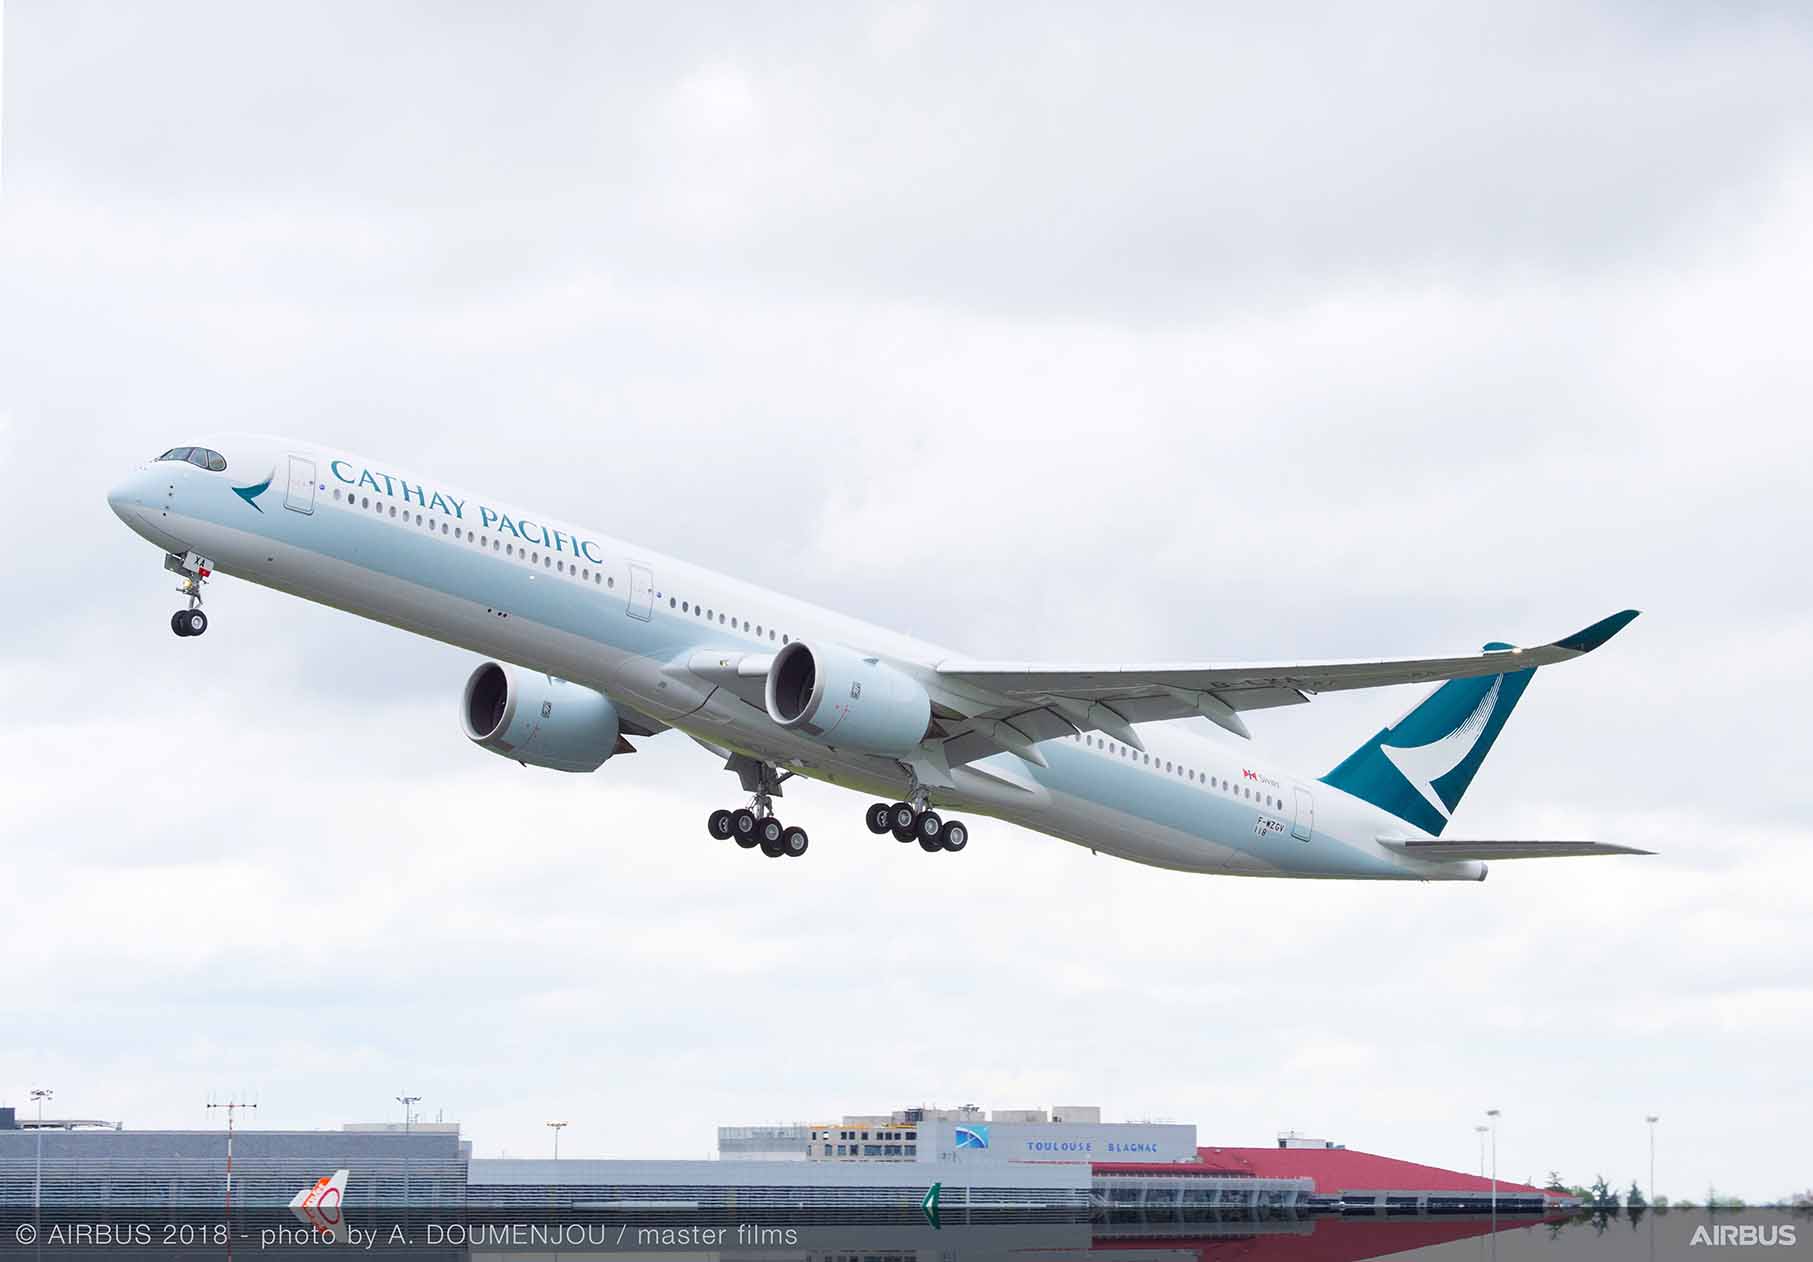 Cathay Pacific and Lufthansa Group start codeshare agreement